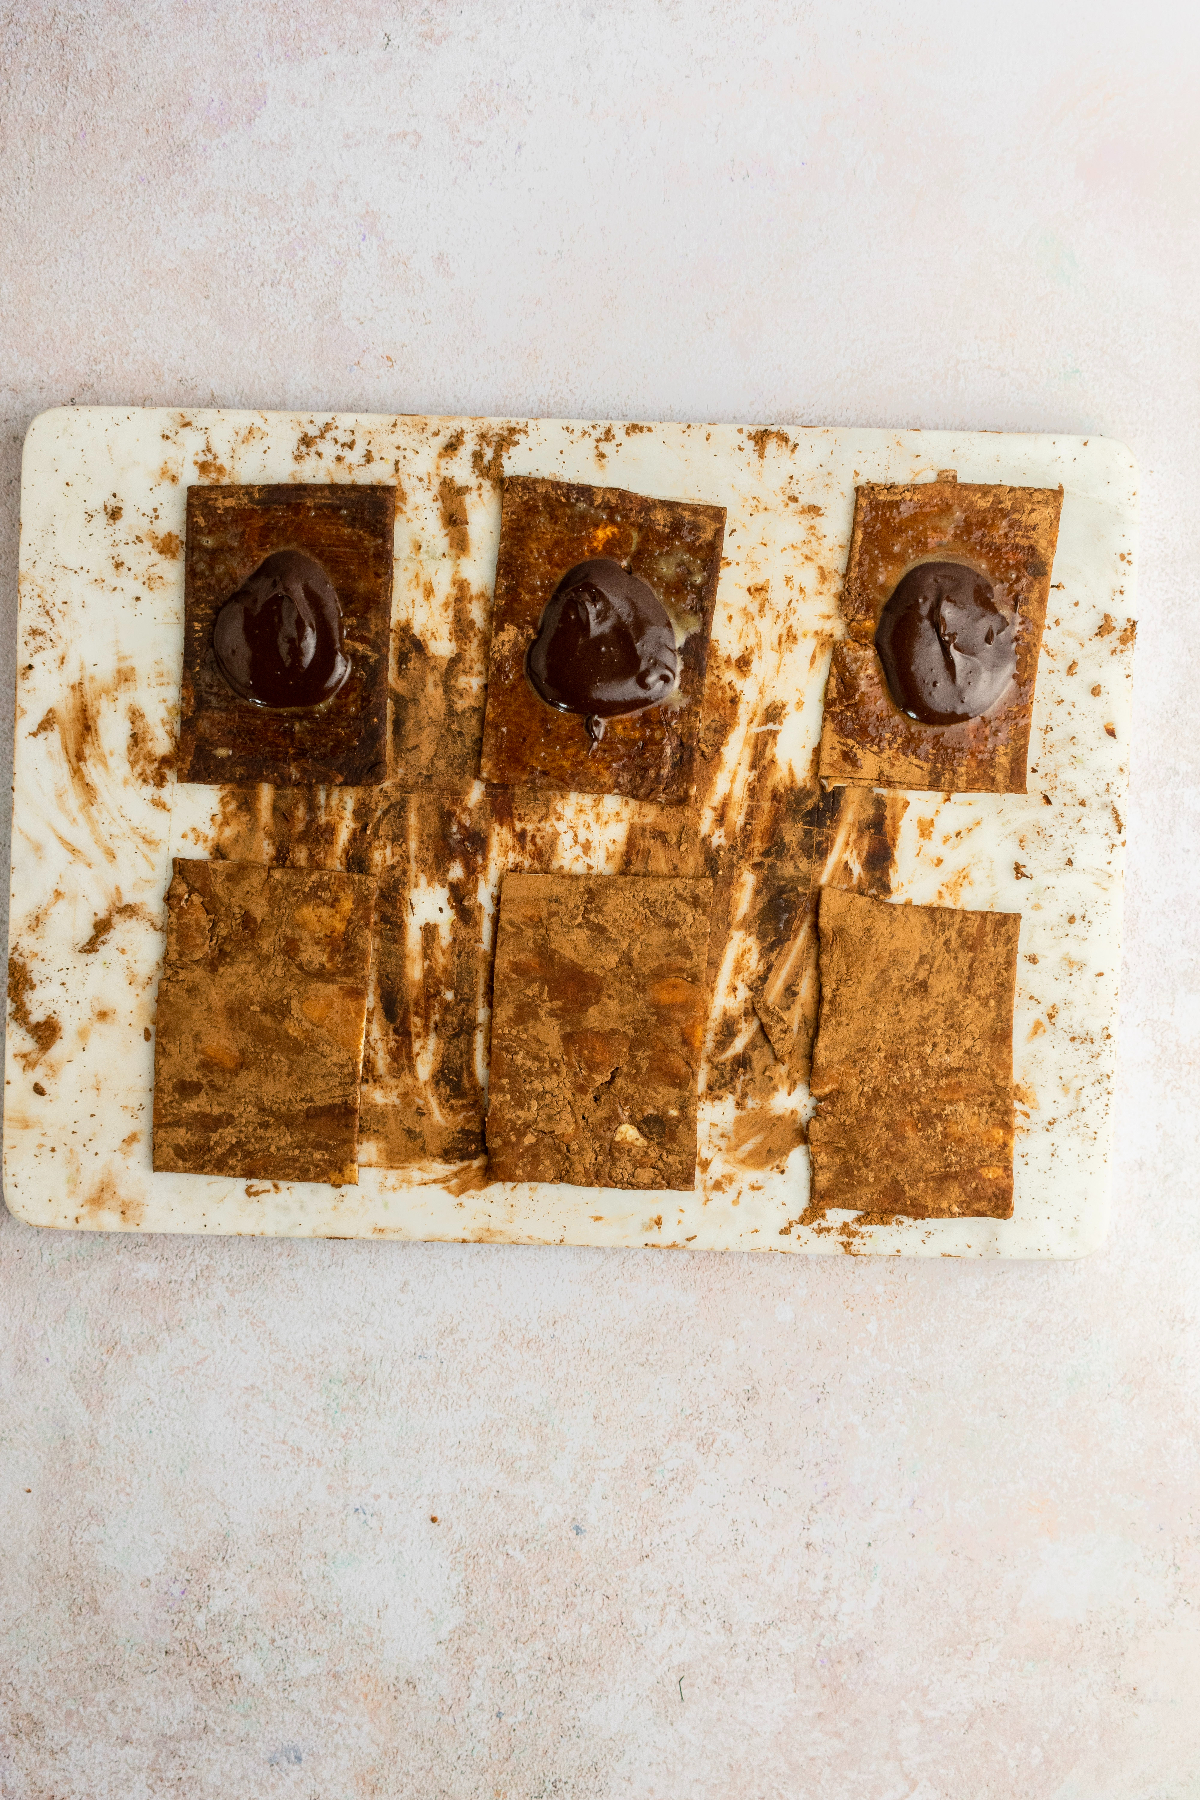 Six dough rectangles with three having chocolate filling.